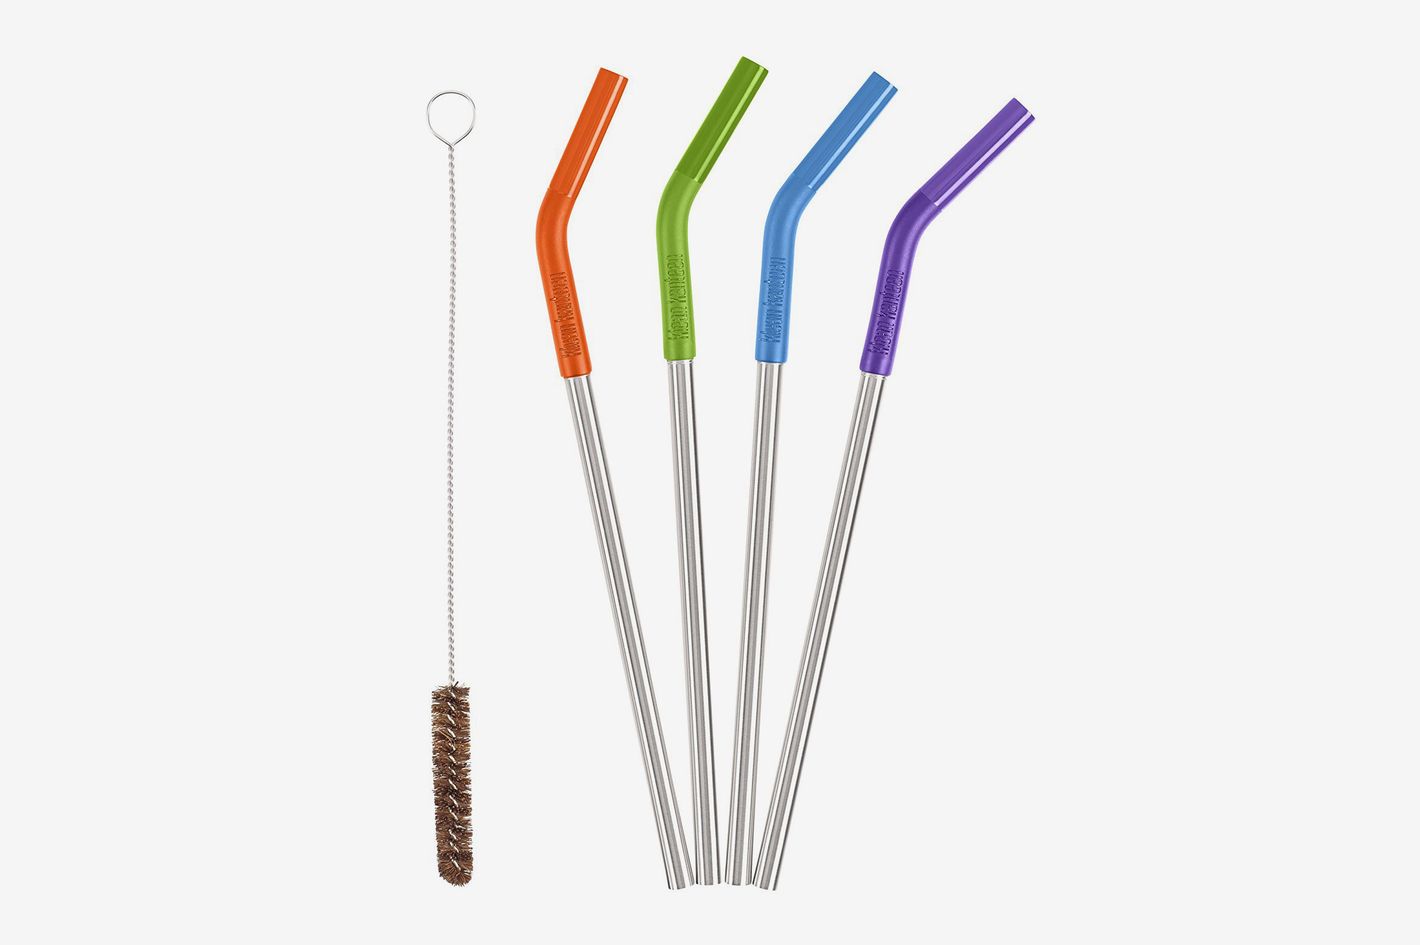 Eco Safe 8 In 1 Silicon Reusable Straws For HOT/COLD Drinks in